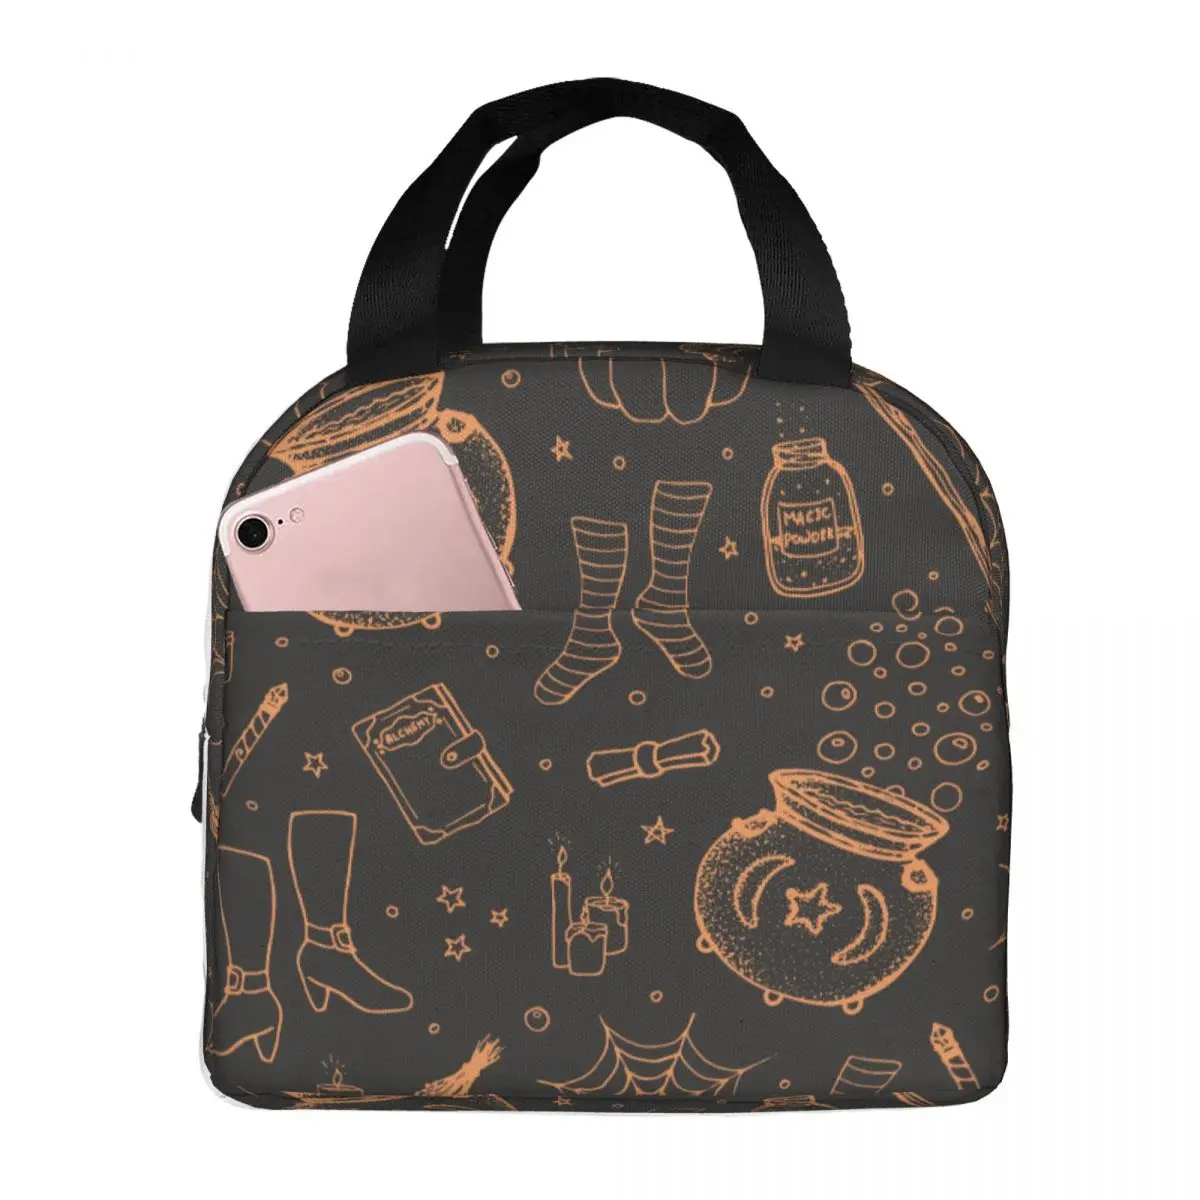 Halloween Pattern Pumpkin Witch's Broom Hat Lunch Bag Portable Insulated Cooler Thermal Cold Food Picnic Work Tote for Women